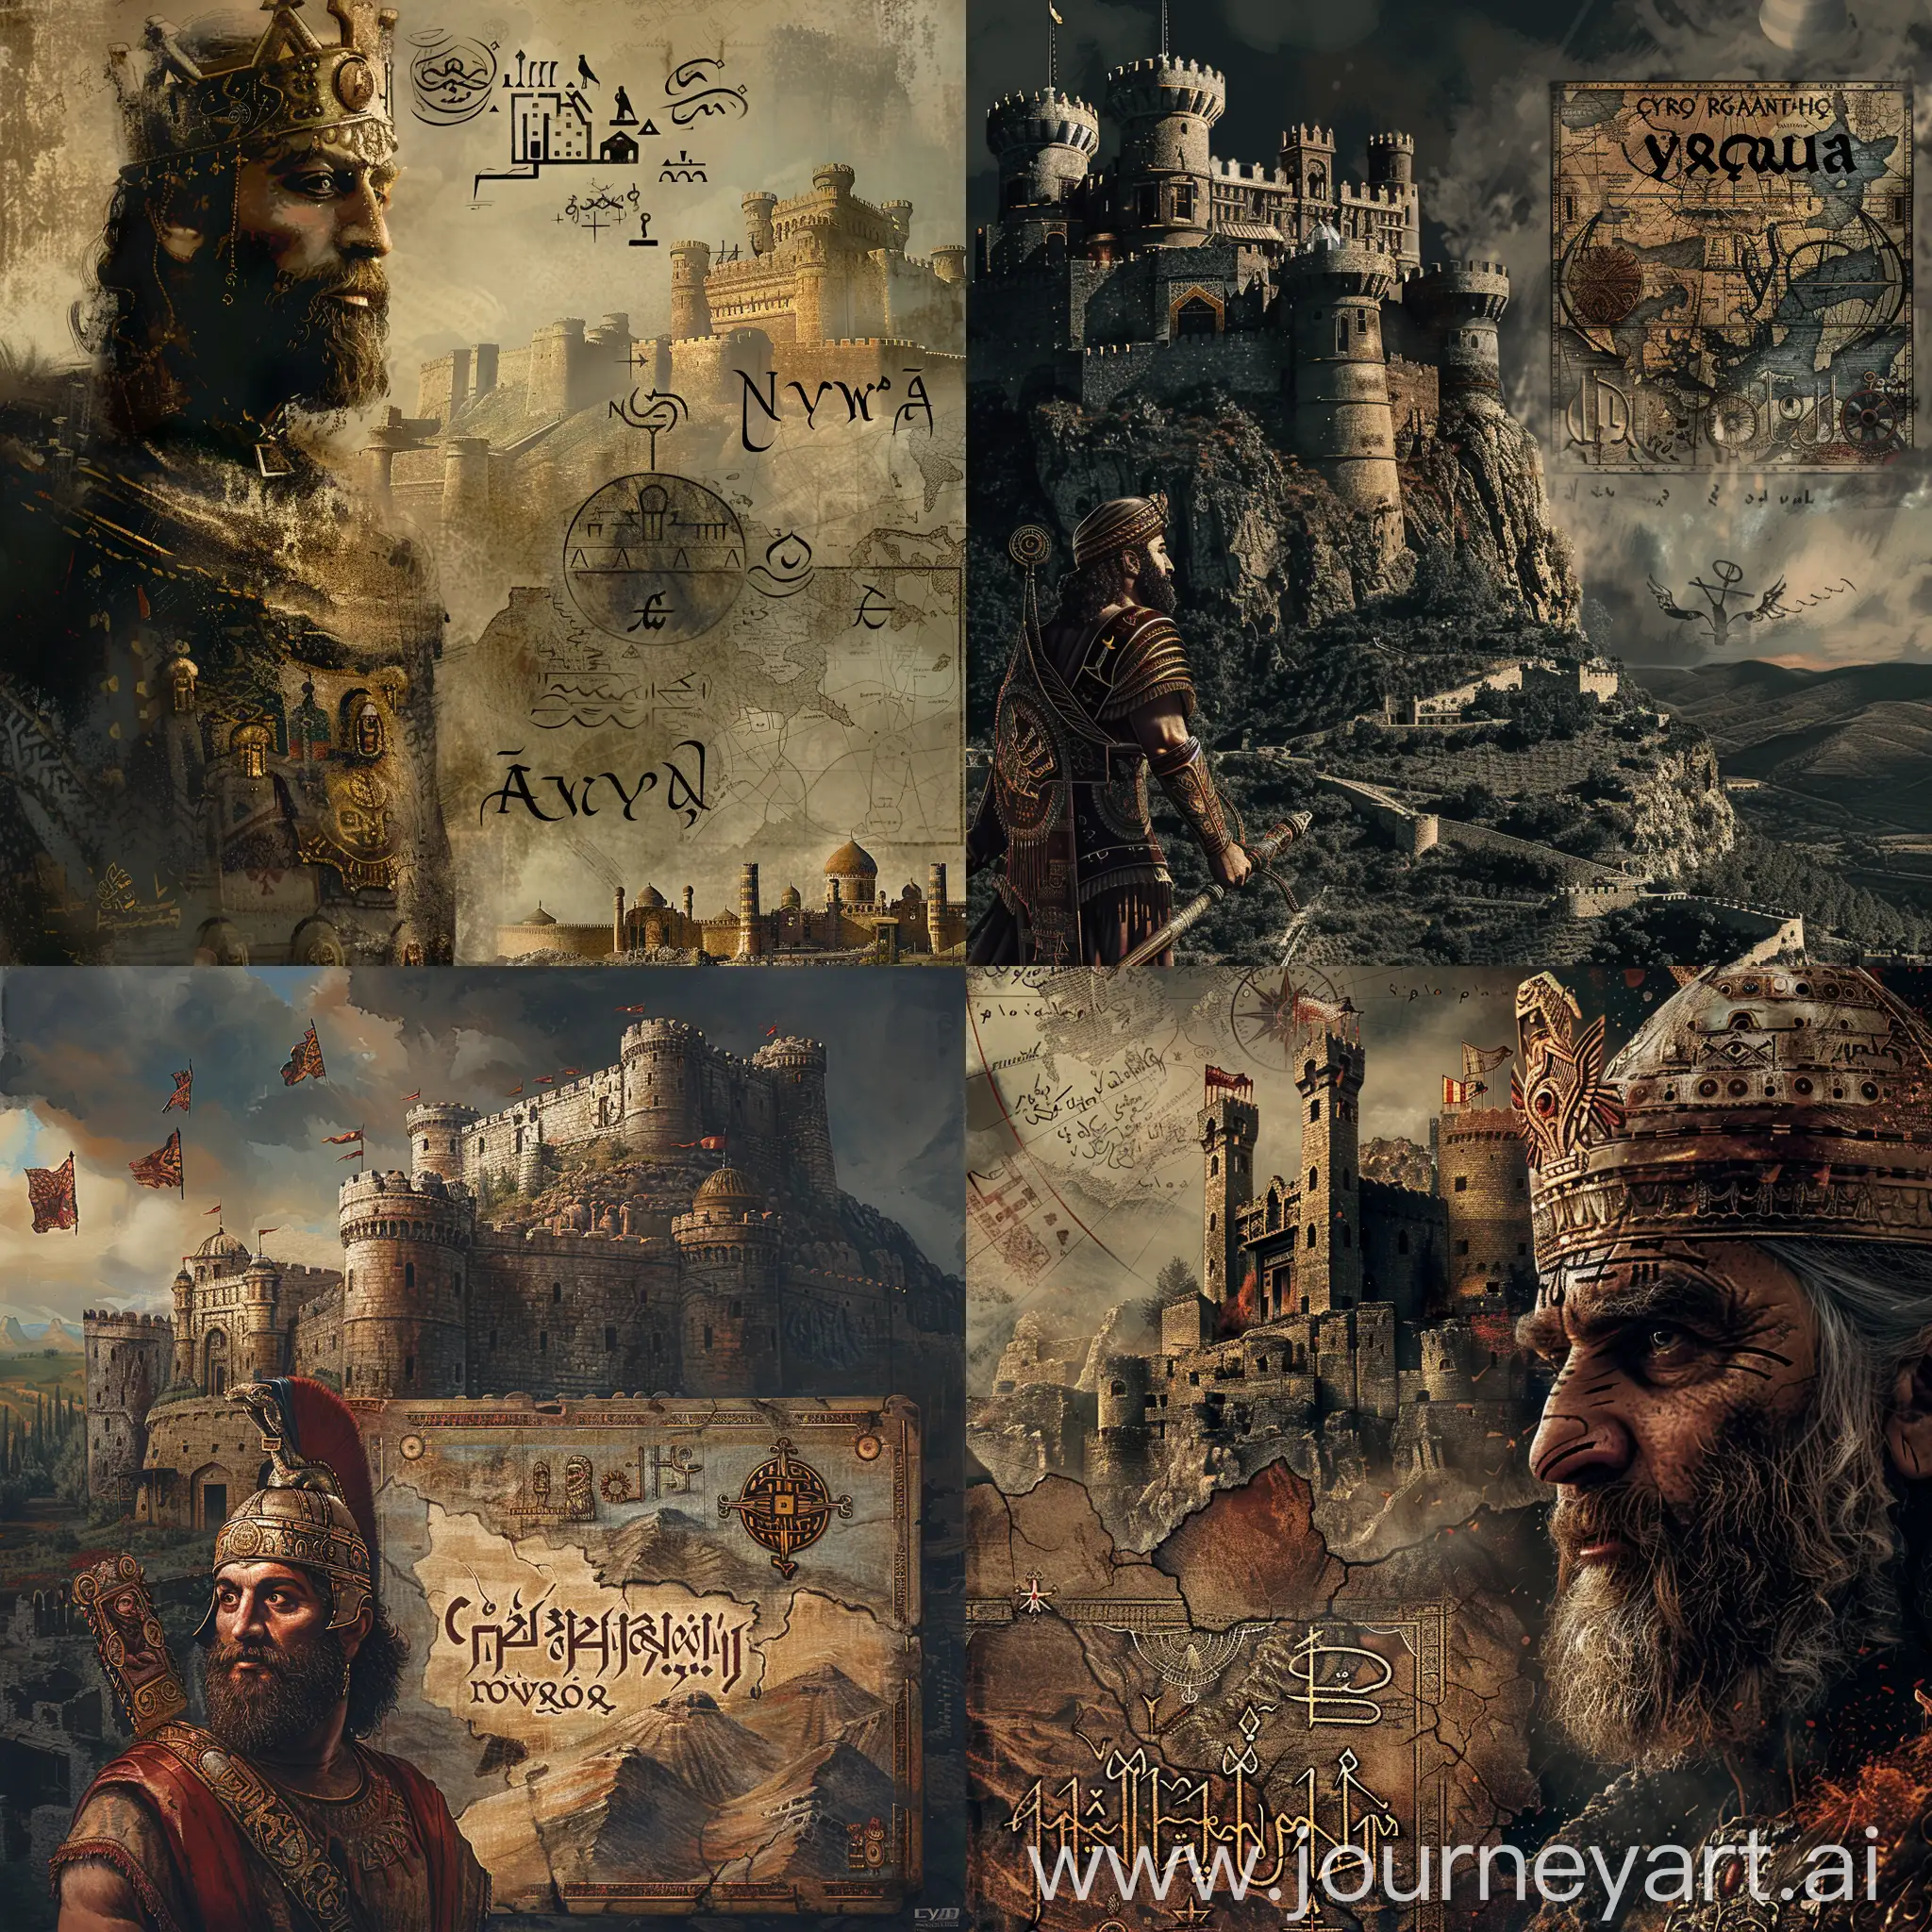 Creating an image with the background of the castle and Cyrus the Great himself, using almost dark and light colors and using high-detail effects such as the map of Cyrus with the Aryan Nowruz symbols, size 16:9